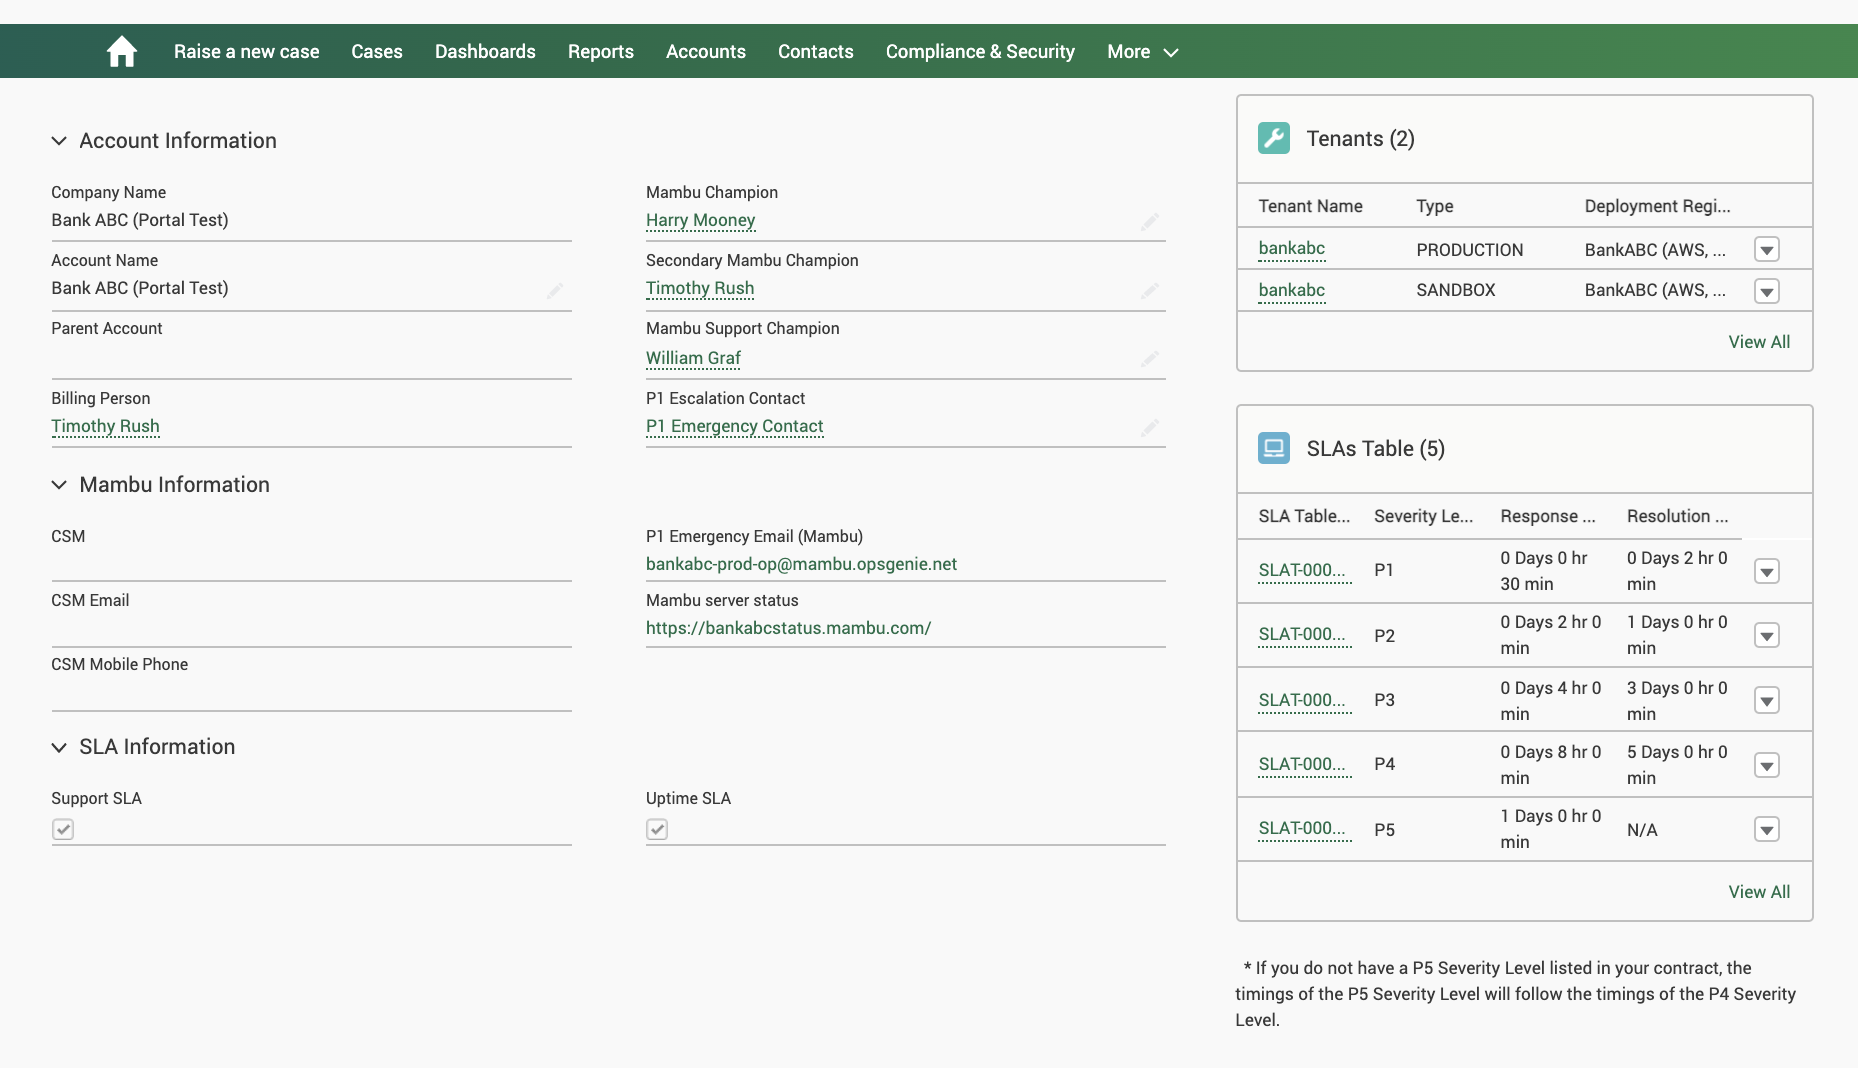 Account overview page with Account Information, Mambu Information, SLA Information, Tenants, and SLAs Table sections.